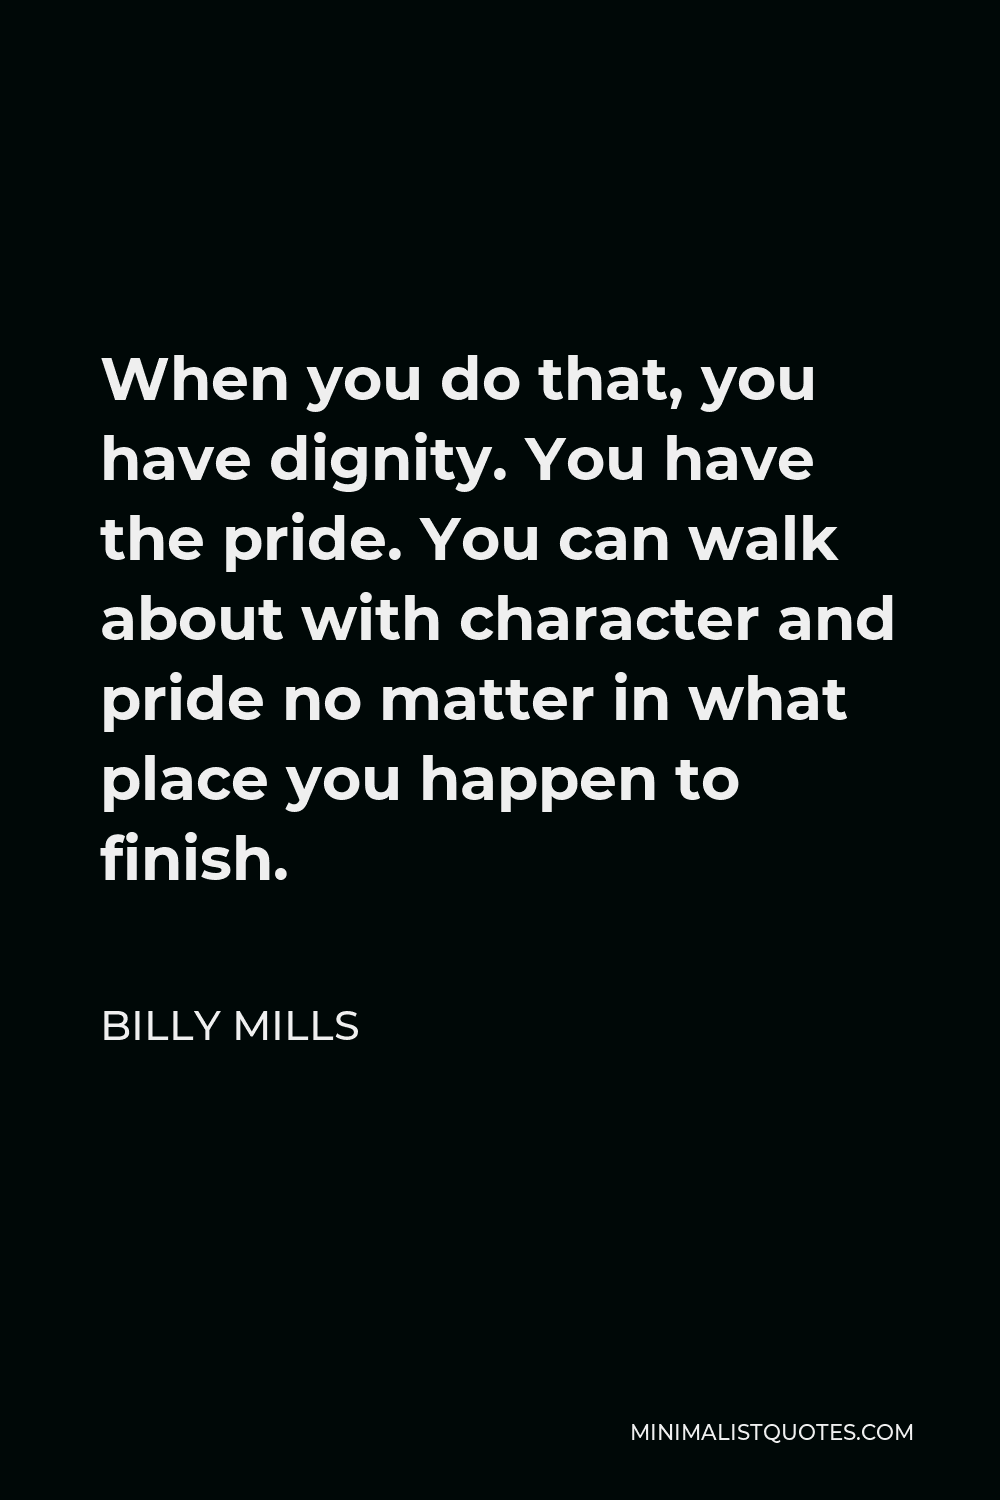 Billy Mills Quote - When you do that, you have dignity. You have the pride. You can walk about with character and pride no matter in what place you happen to finish.